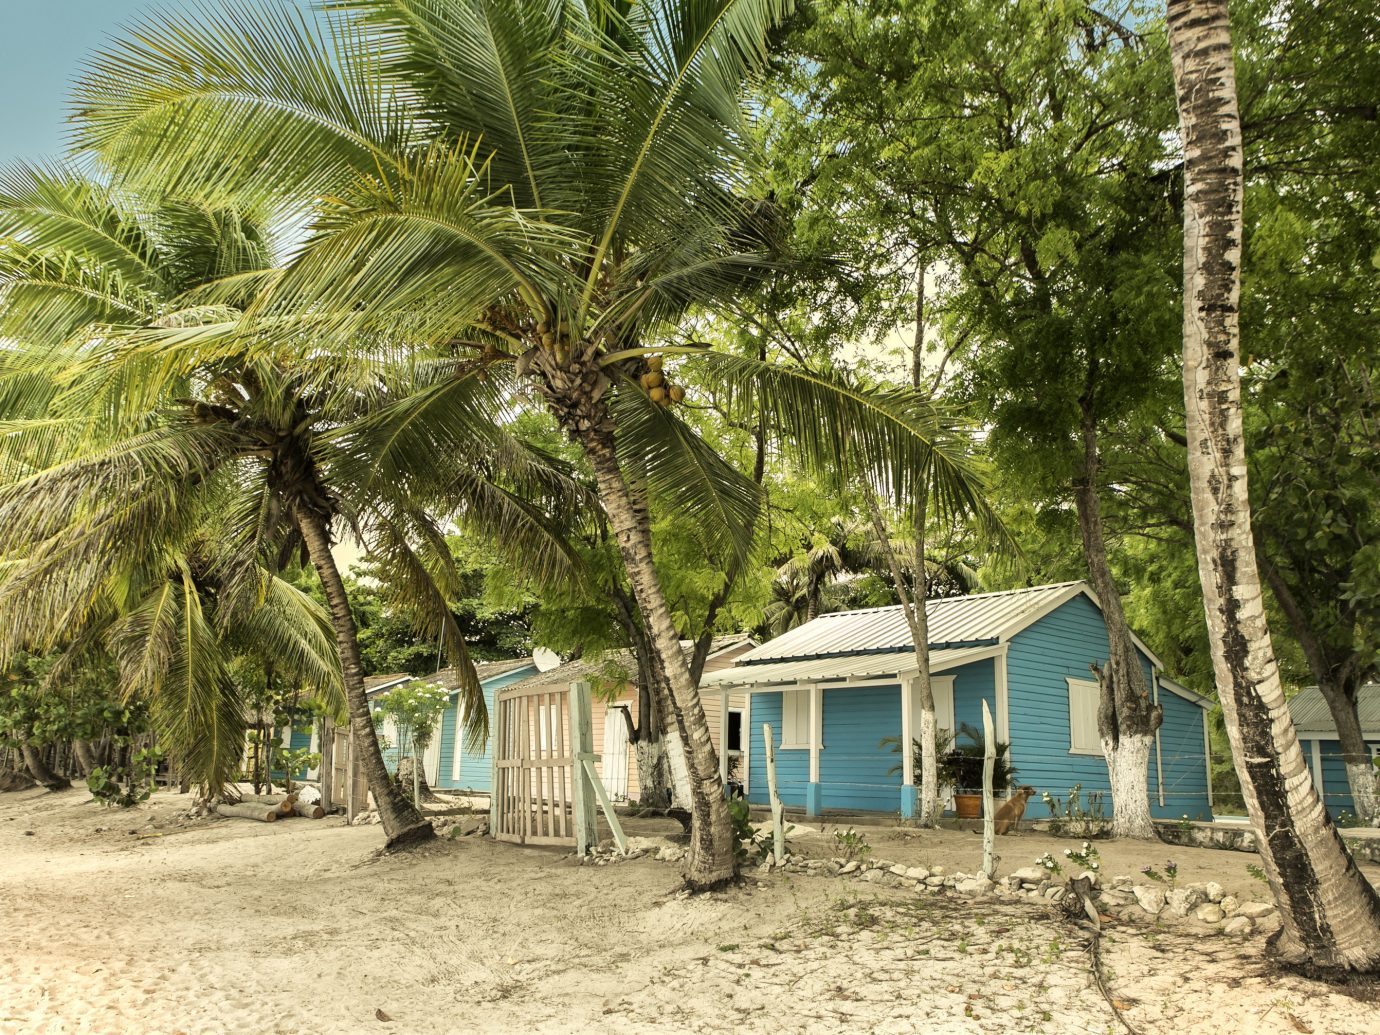 Travel Tips tree outdoor ground plant arecales vacation Beach hut Resort Jungle palm dirt area shade sandy